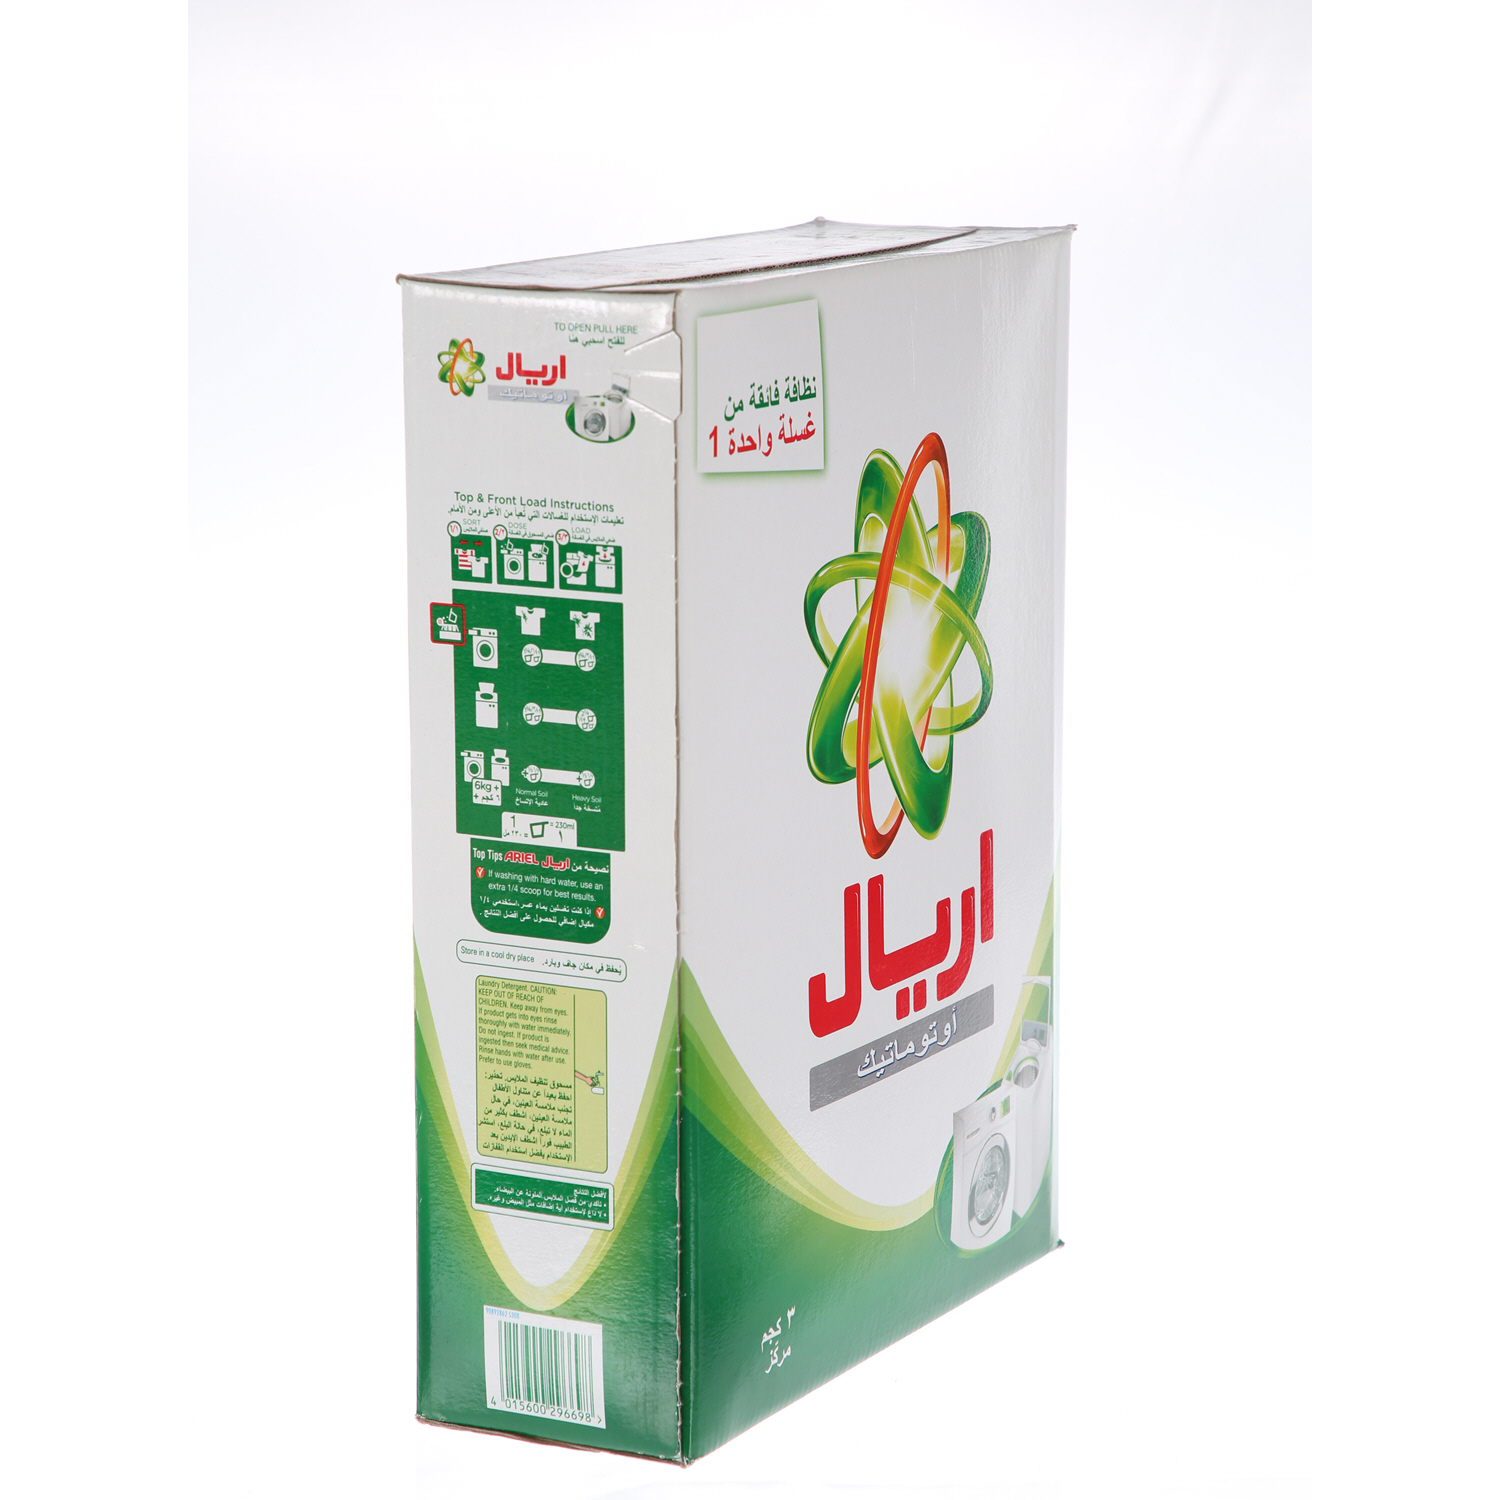 Ariel Detergent Concentrated Green Automatic 3 Kg